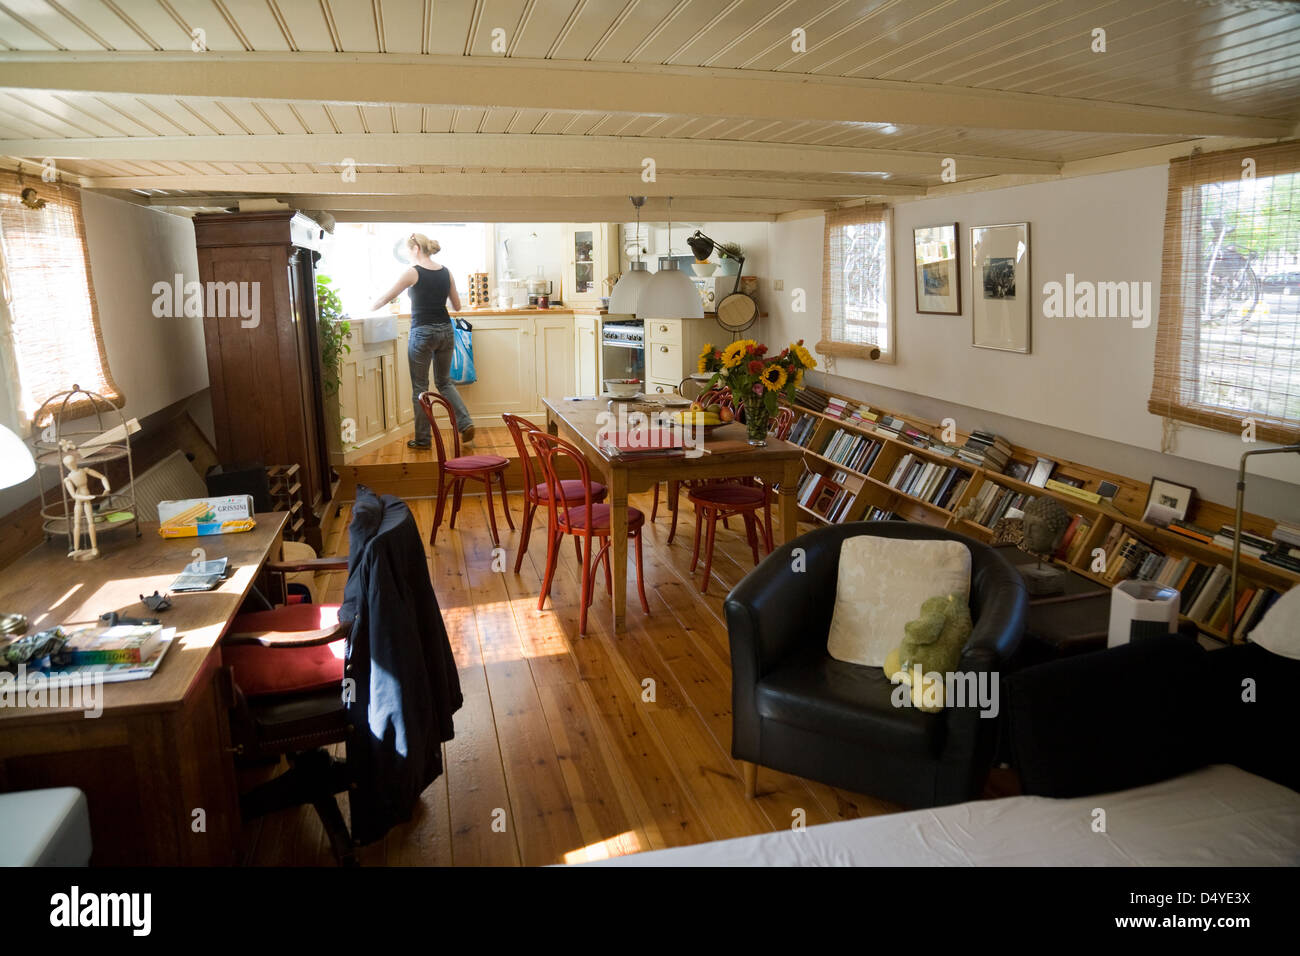 Amsterdam, Netherlands, the interior of a houseboat Stock Photo - Alamy